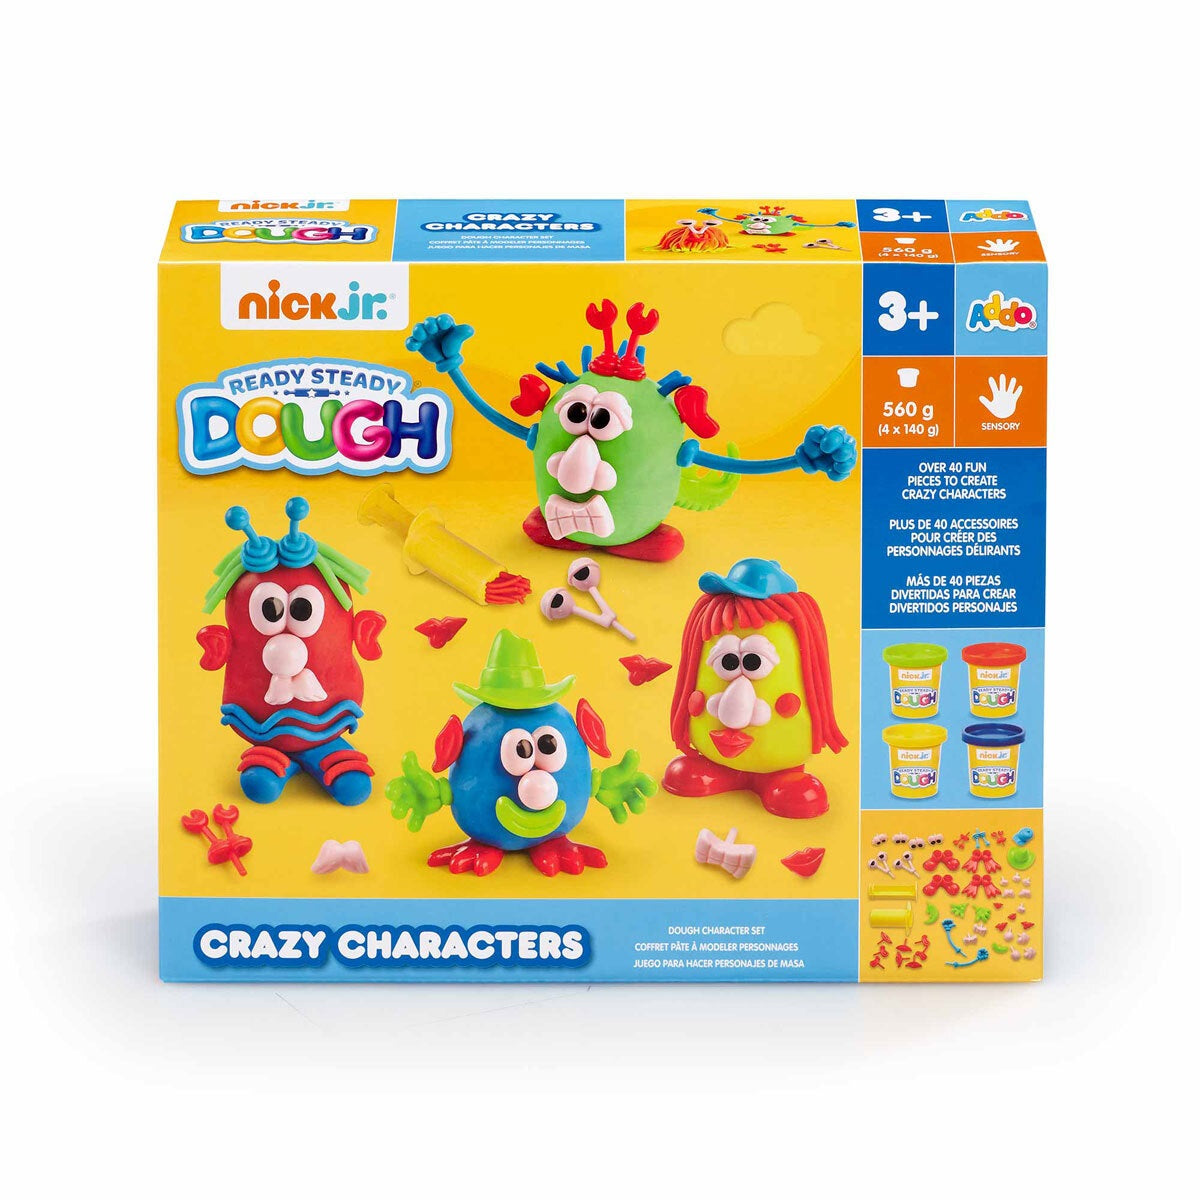 Nick Jr. Ready Steady Dough Crazy Characters Playset